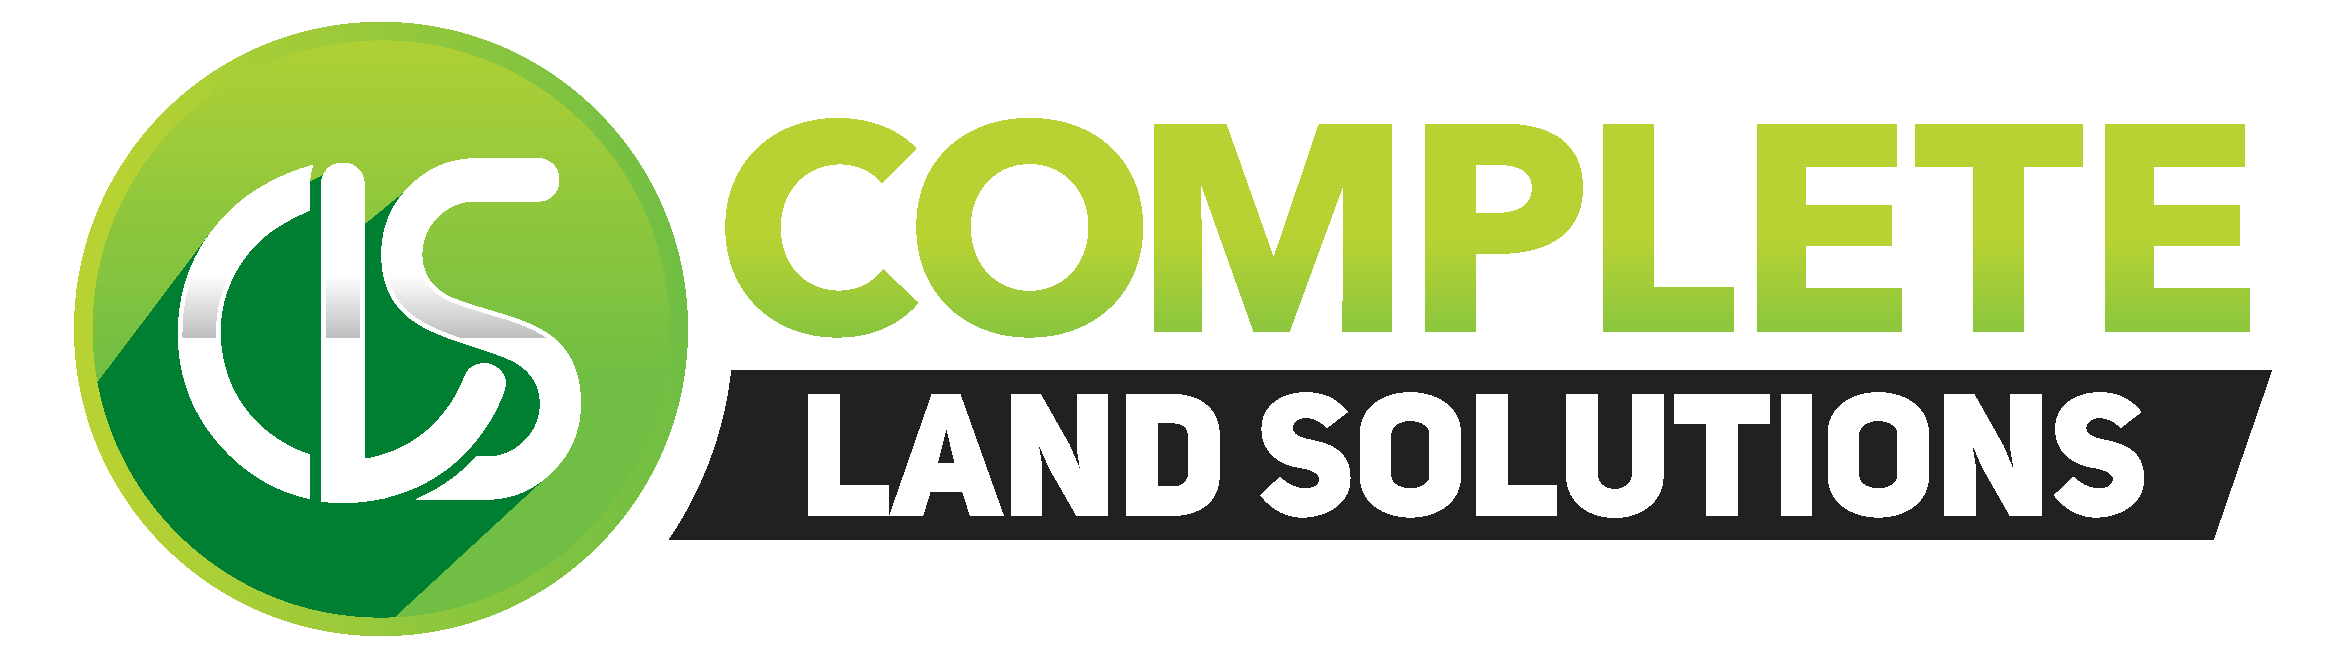 Complete Land Solutions logo